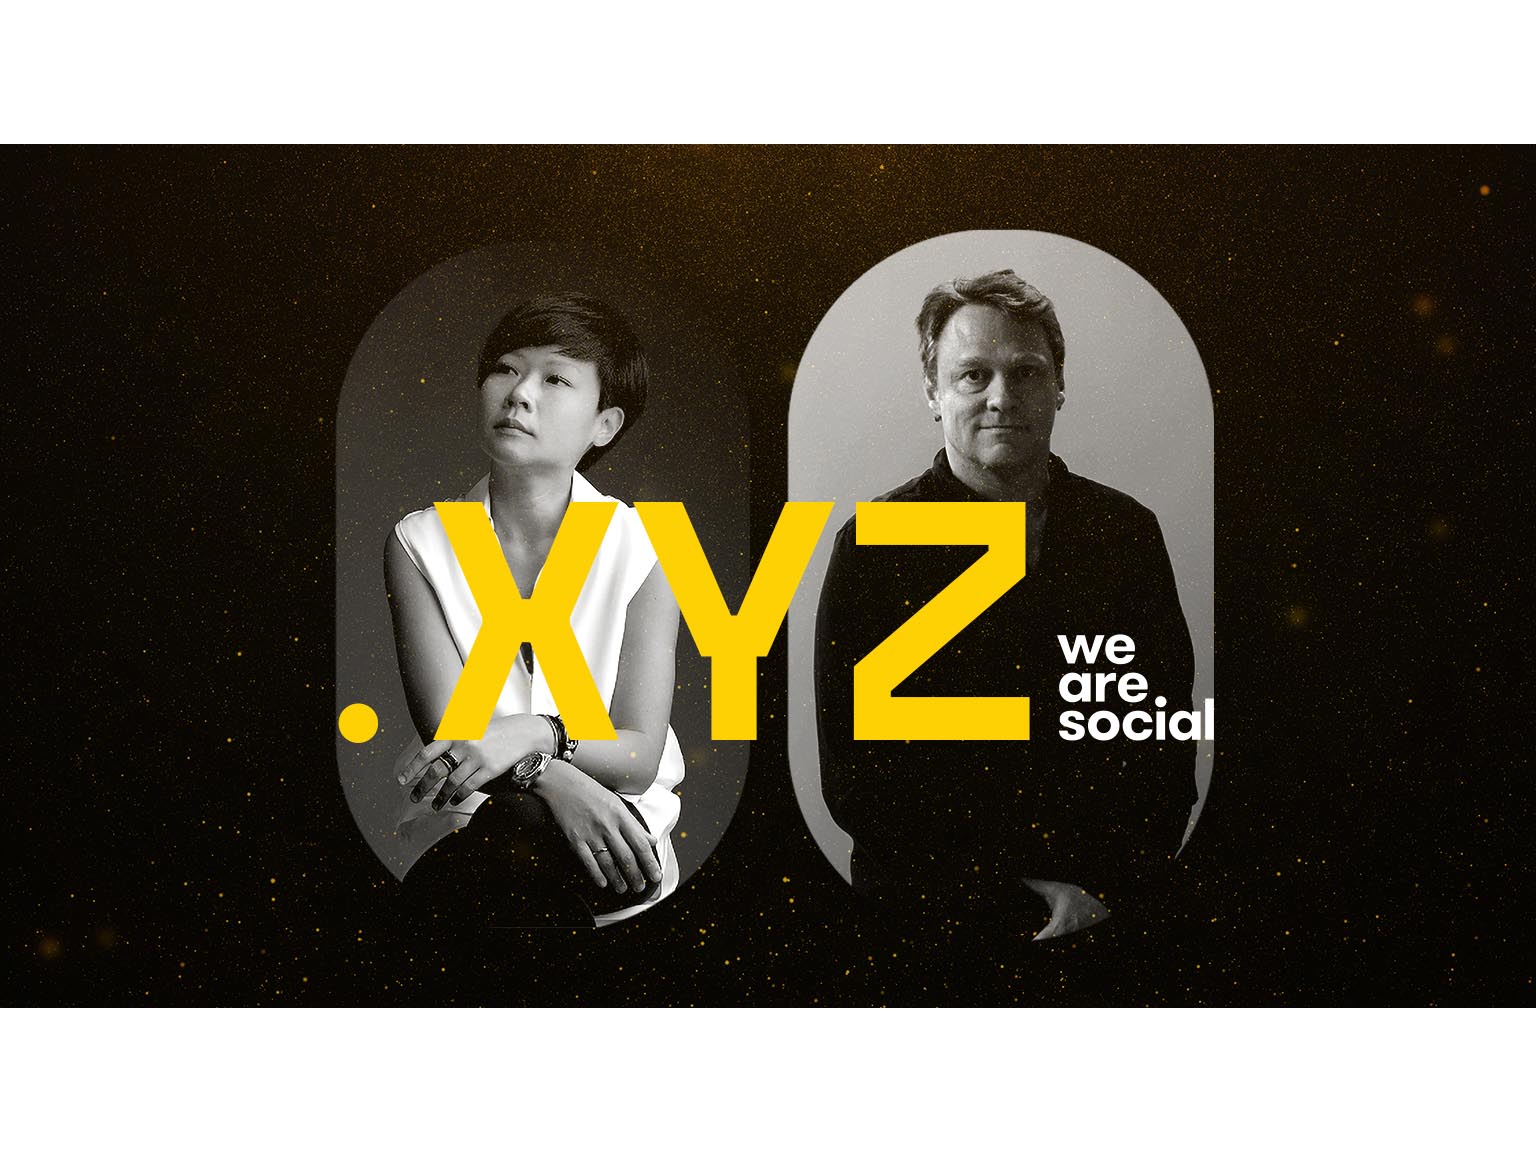 We Are Social's innovation arm .XYZ expands its offering under new leadership